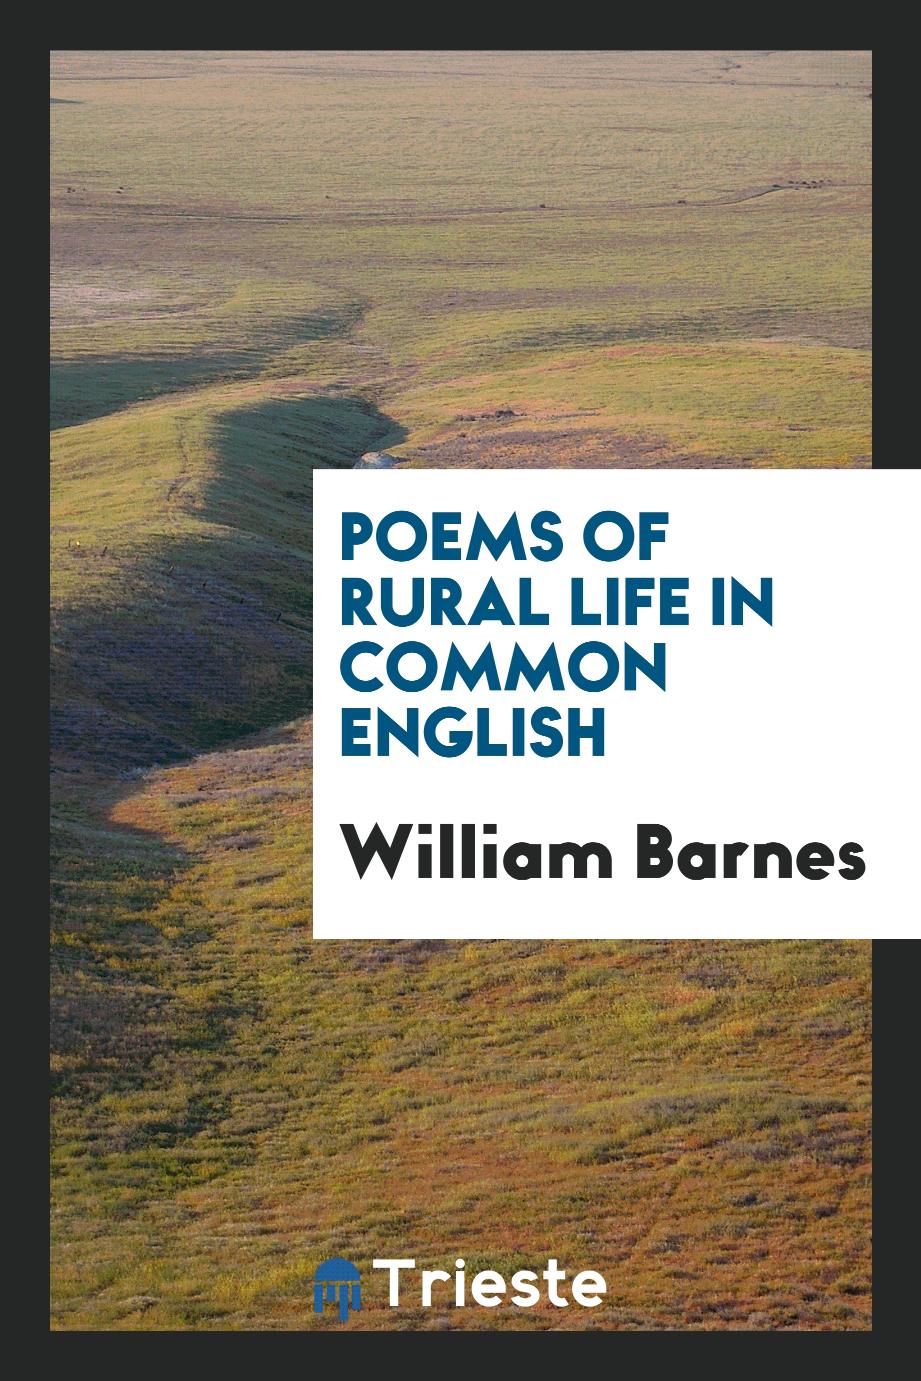 Poems of rural life in common English